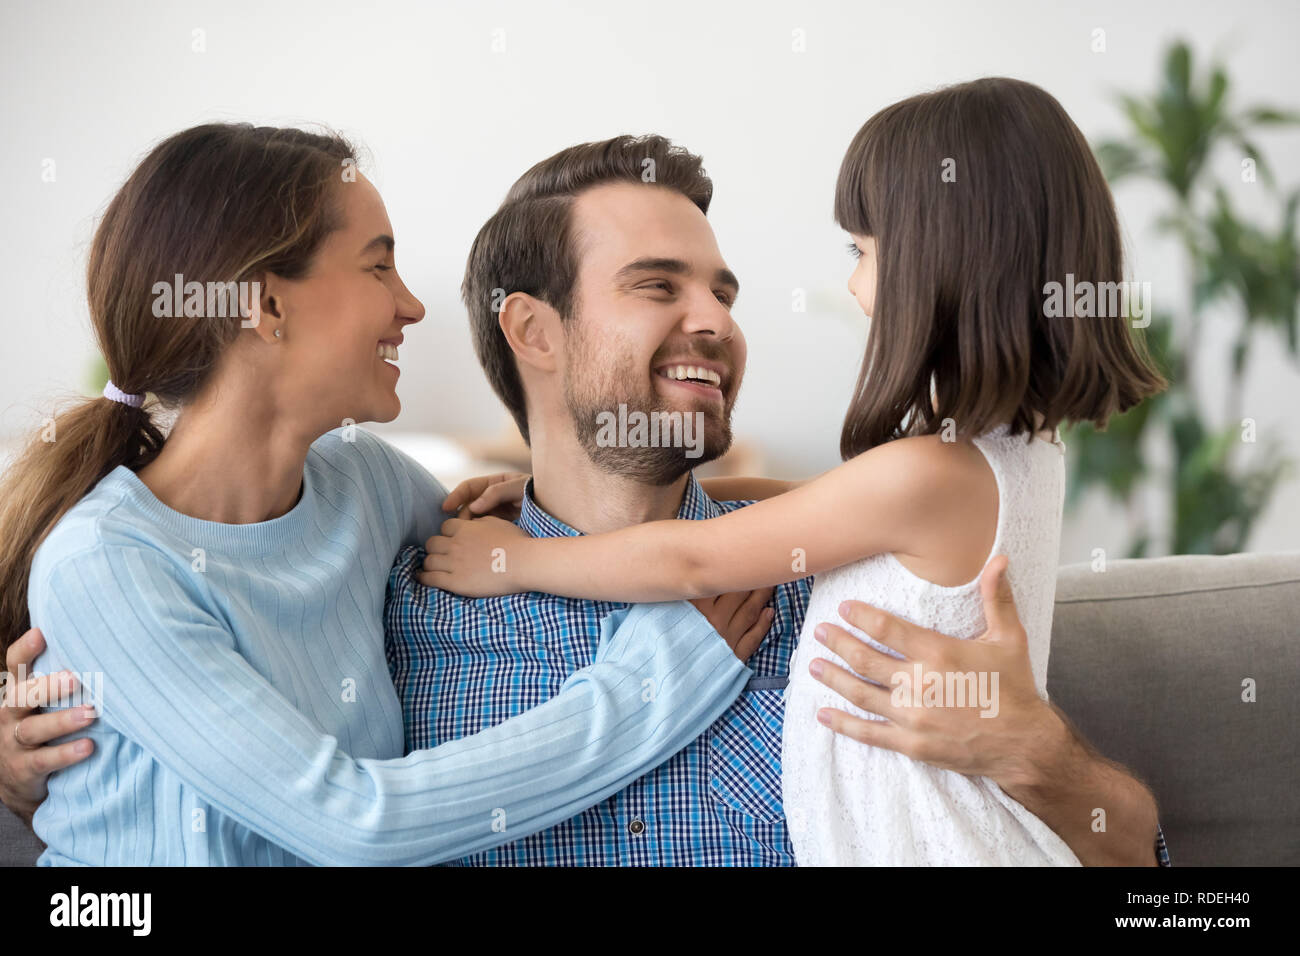 Cute kid daughter and wife embracing happy dad having fun Stock Photo